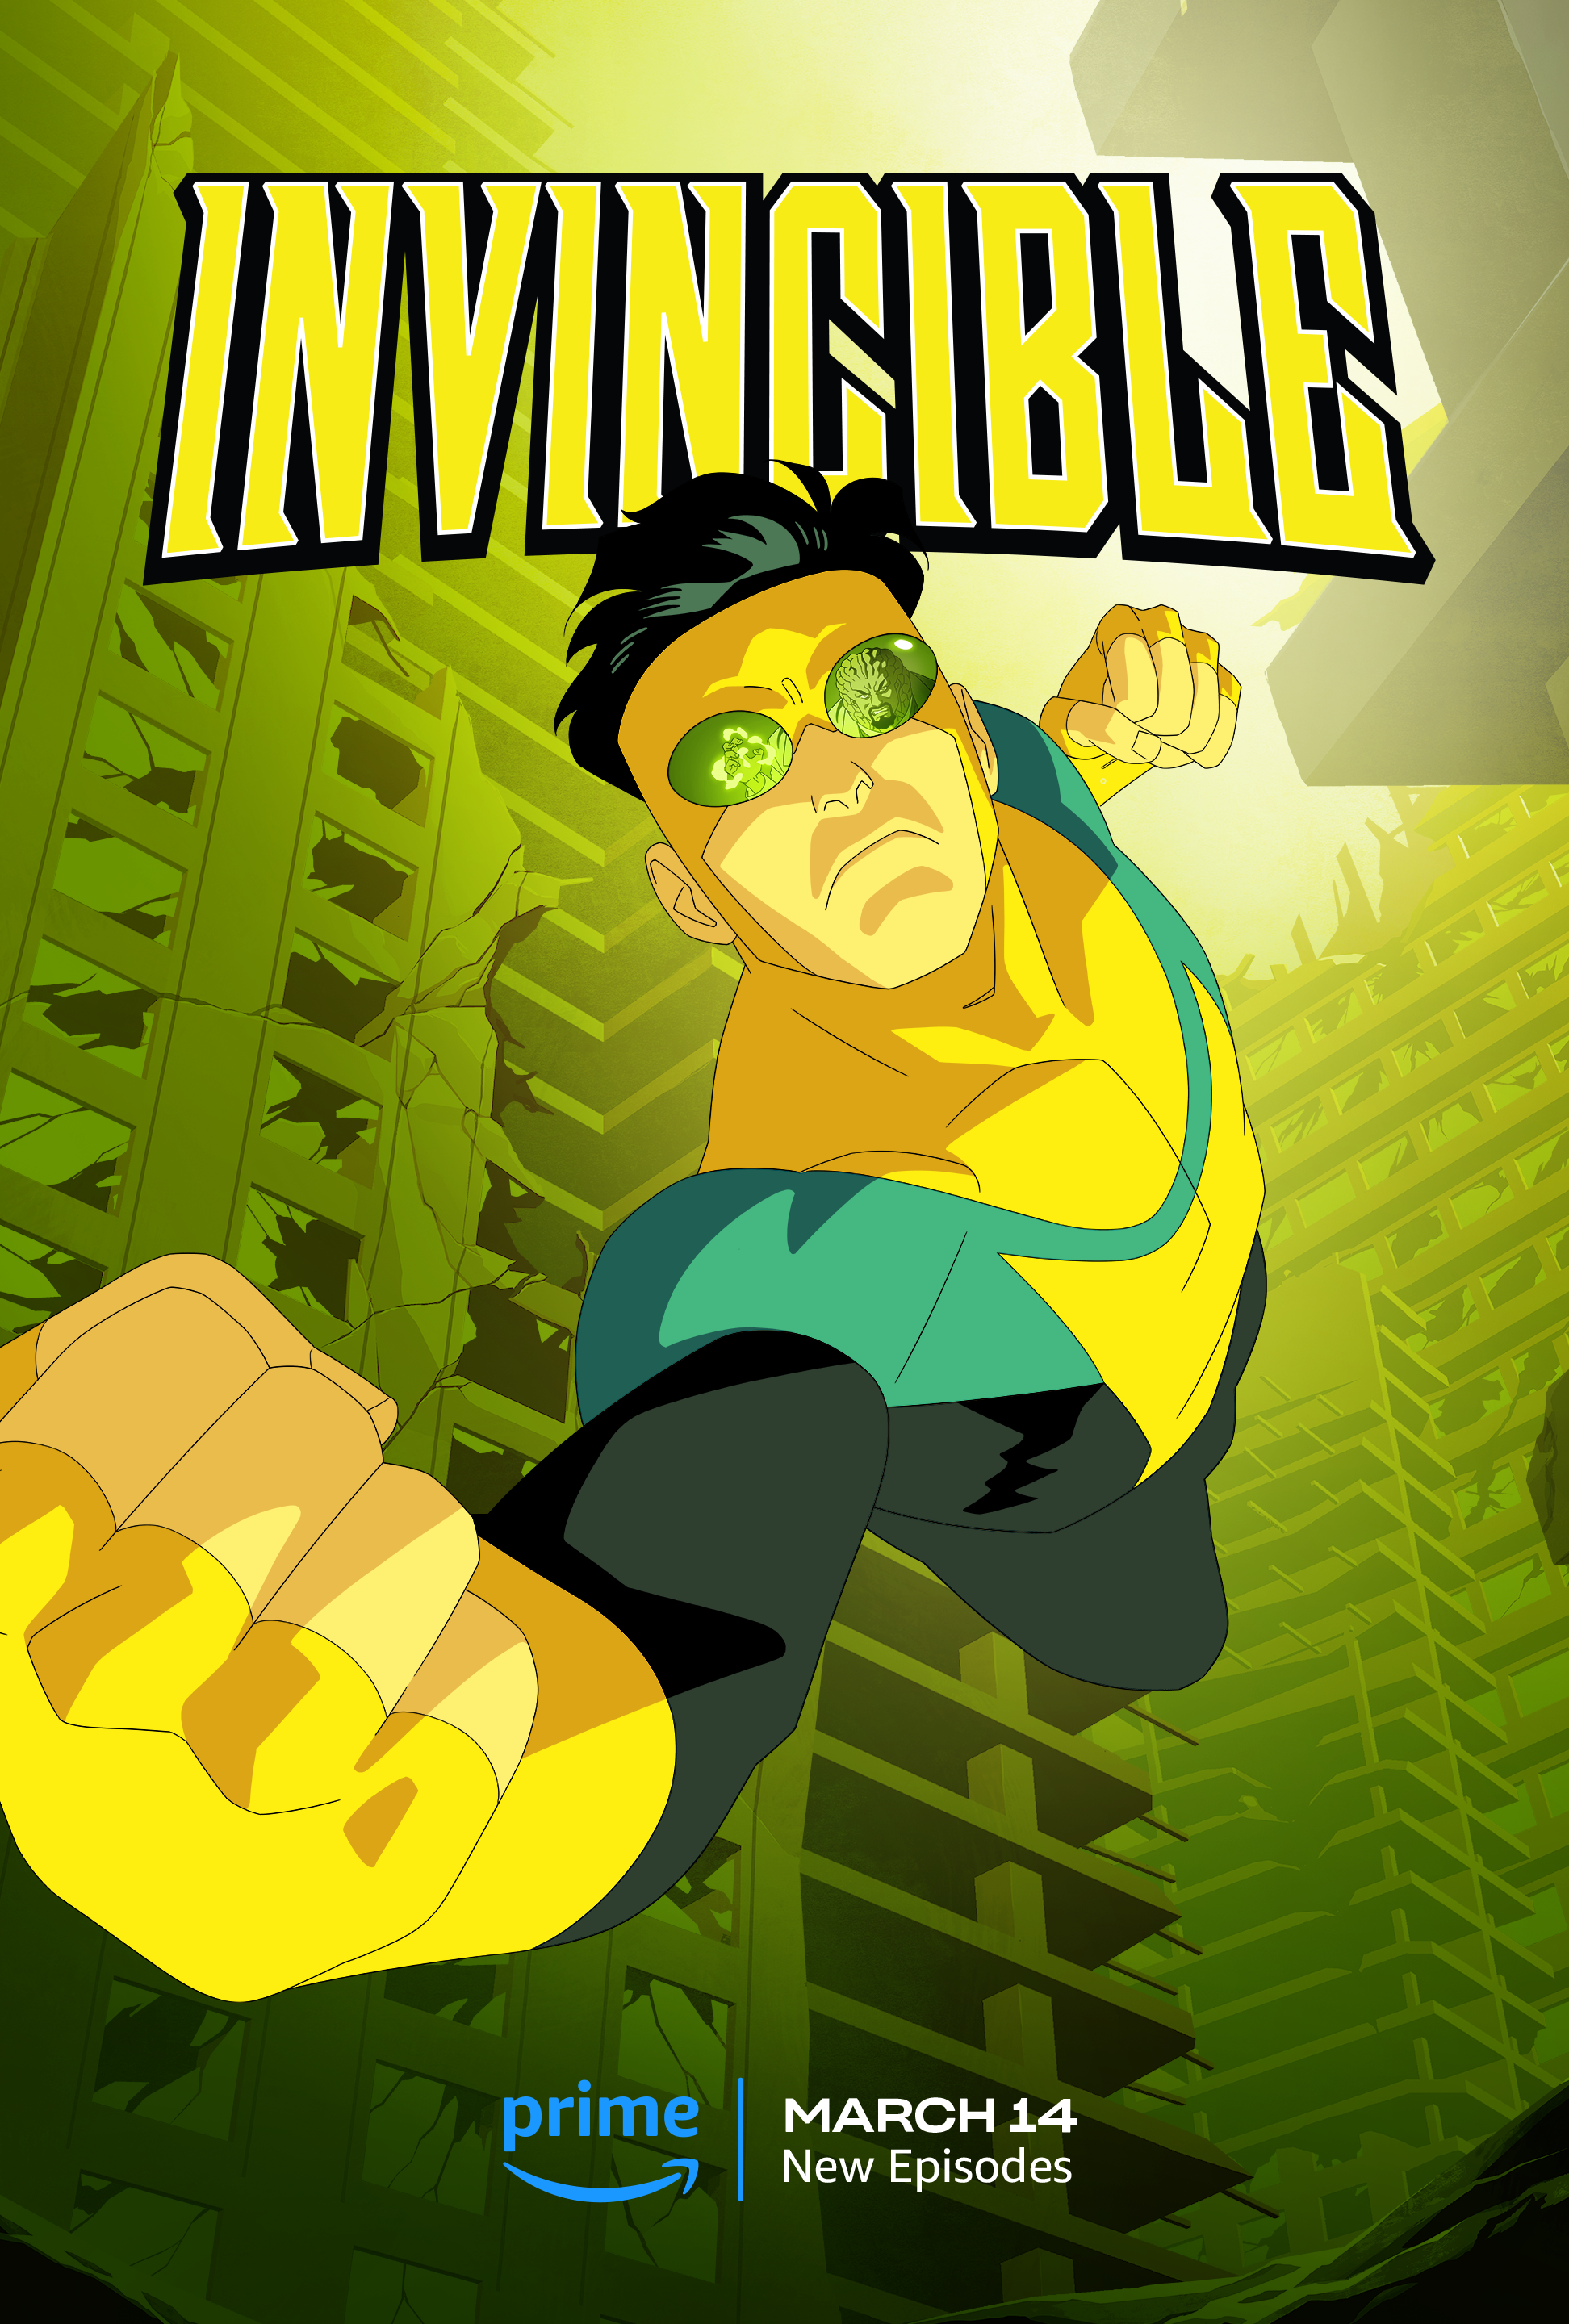 Invincible Season 2 Part 2 poster featuring title character mid-flight